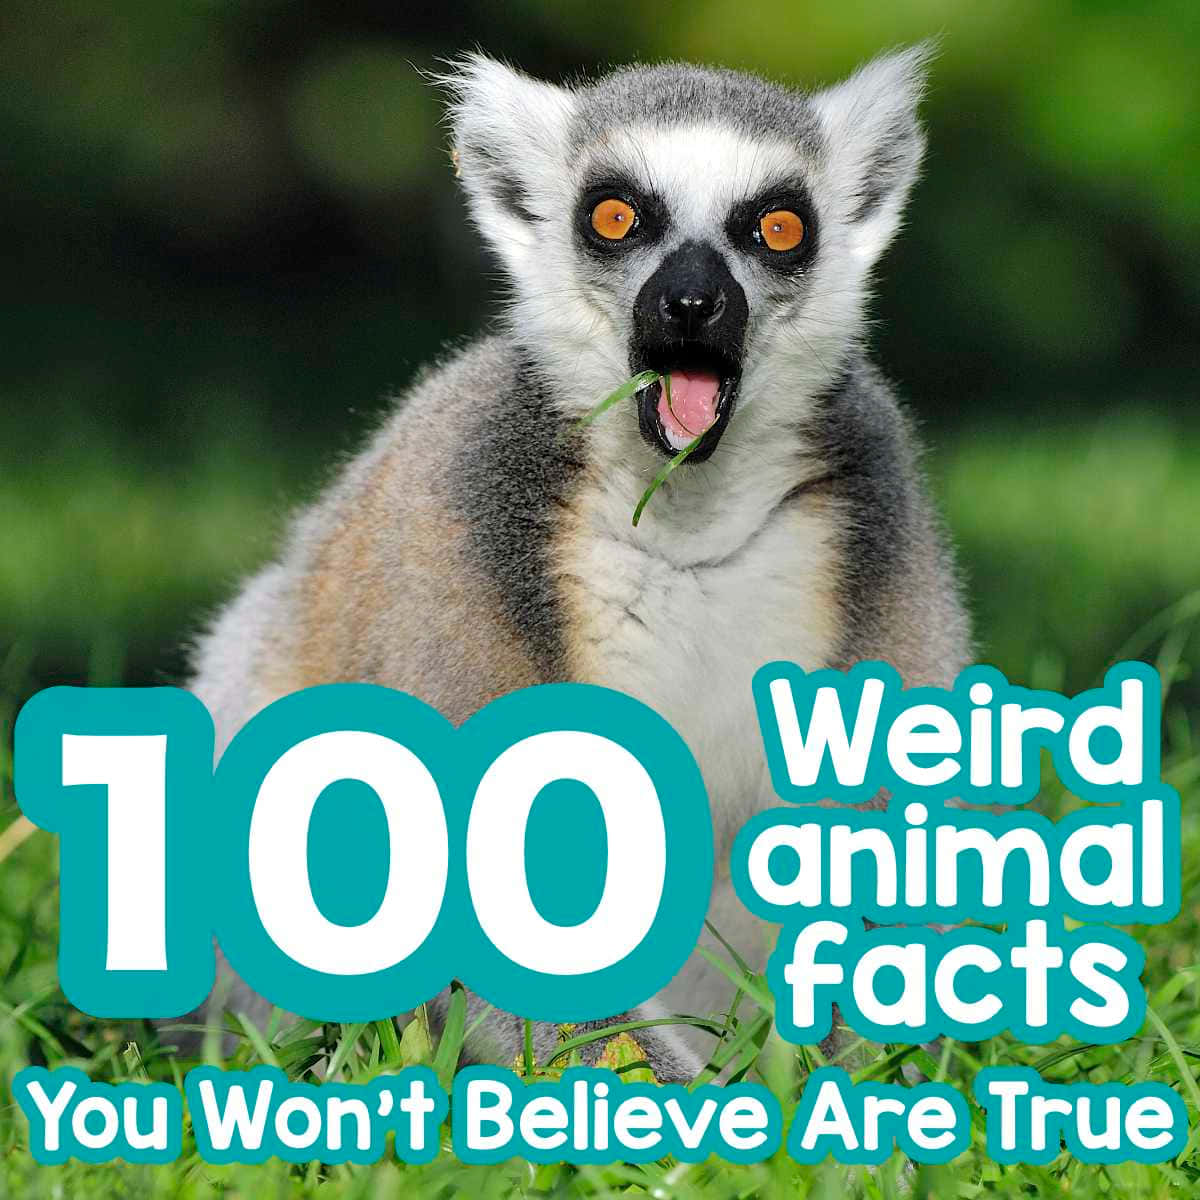 100 Weird Animal Facts You Won't Believe Are True